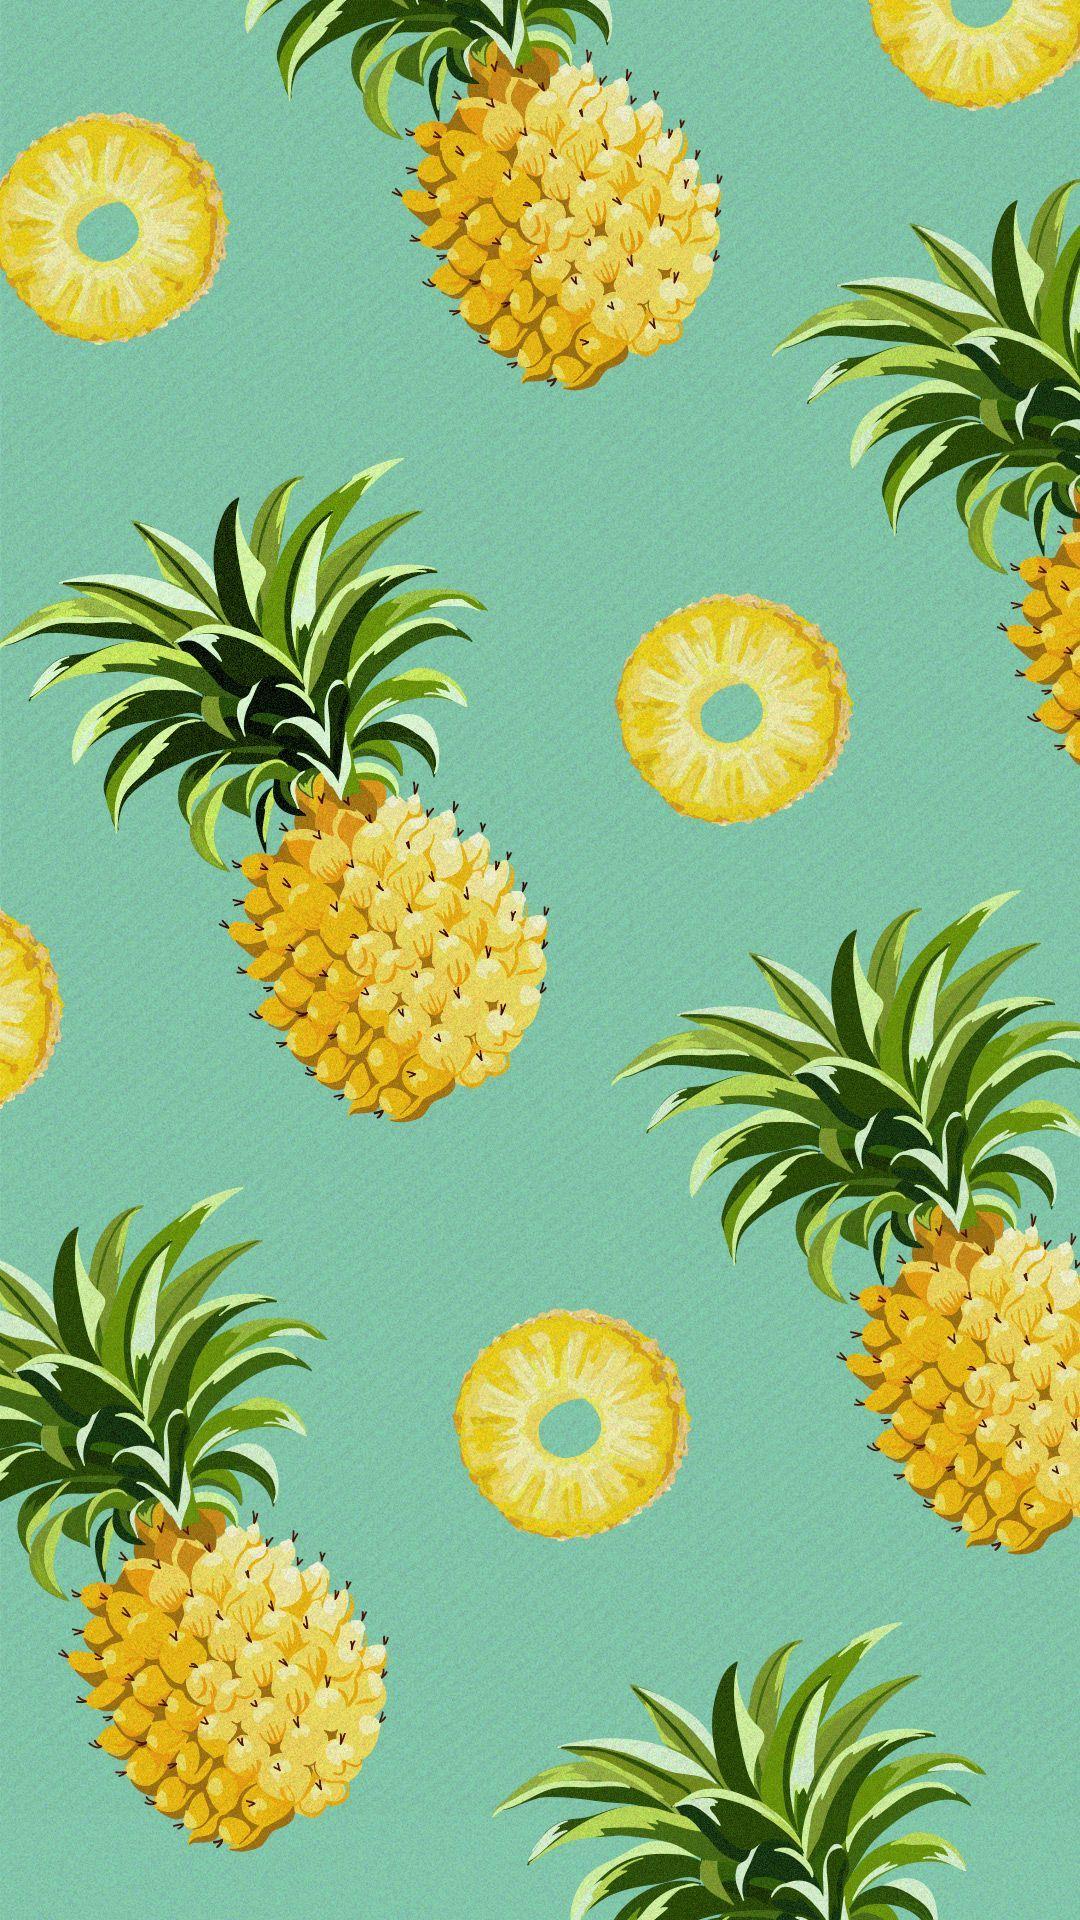 35 Pineapple Wallpaper for iPhone Free Downloads  Welcome To The One  Percent  Flower iphone wallpaper Pretty wallpaper iphone Iphone wallpaper